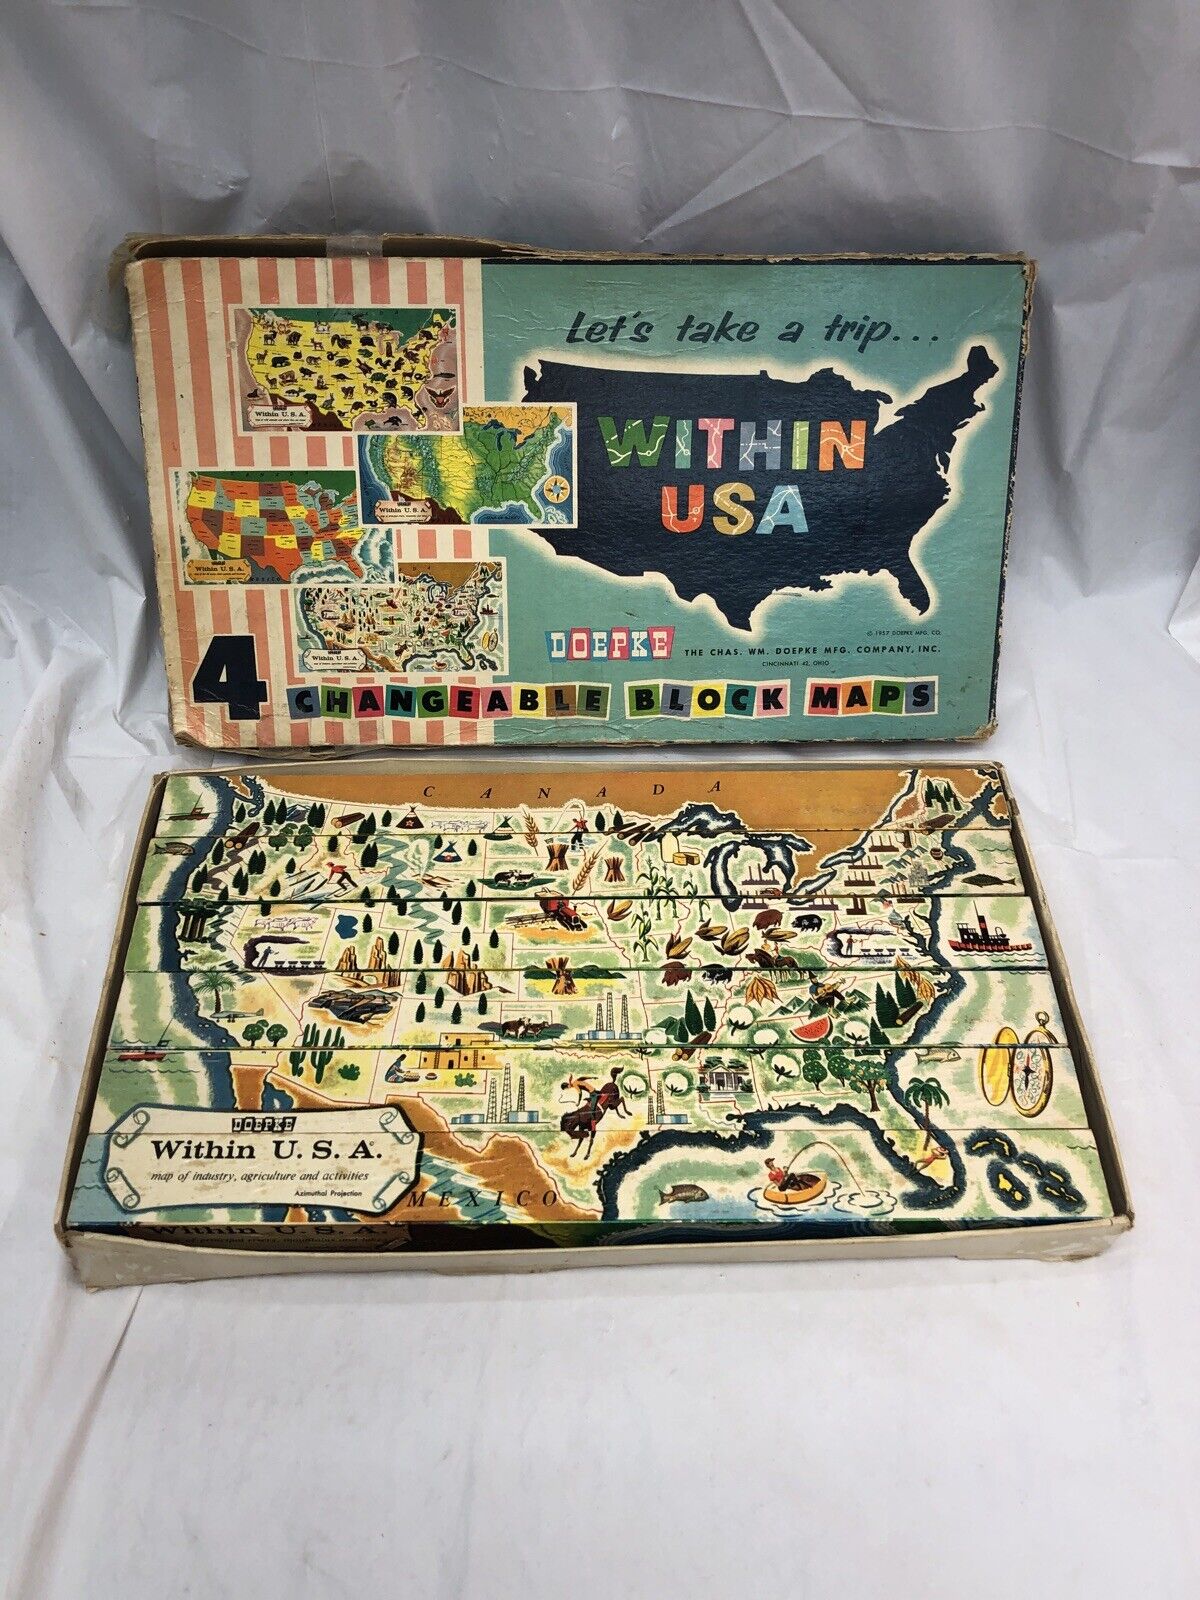 Chas Wm Doepke VTG 1950s Wooden Block Maps Toy Let\'s Take A Trip Within USA 1957